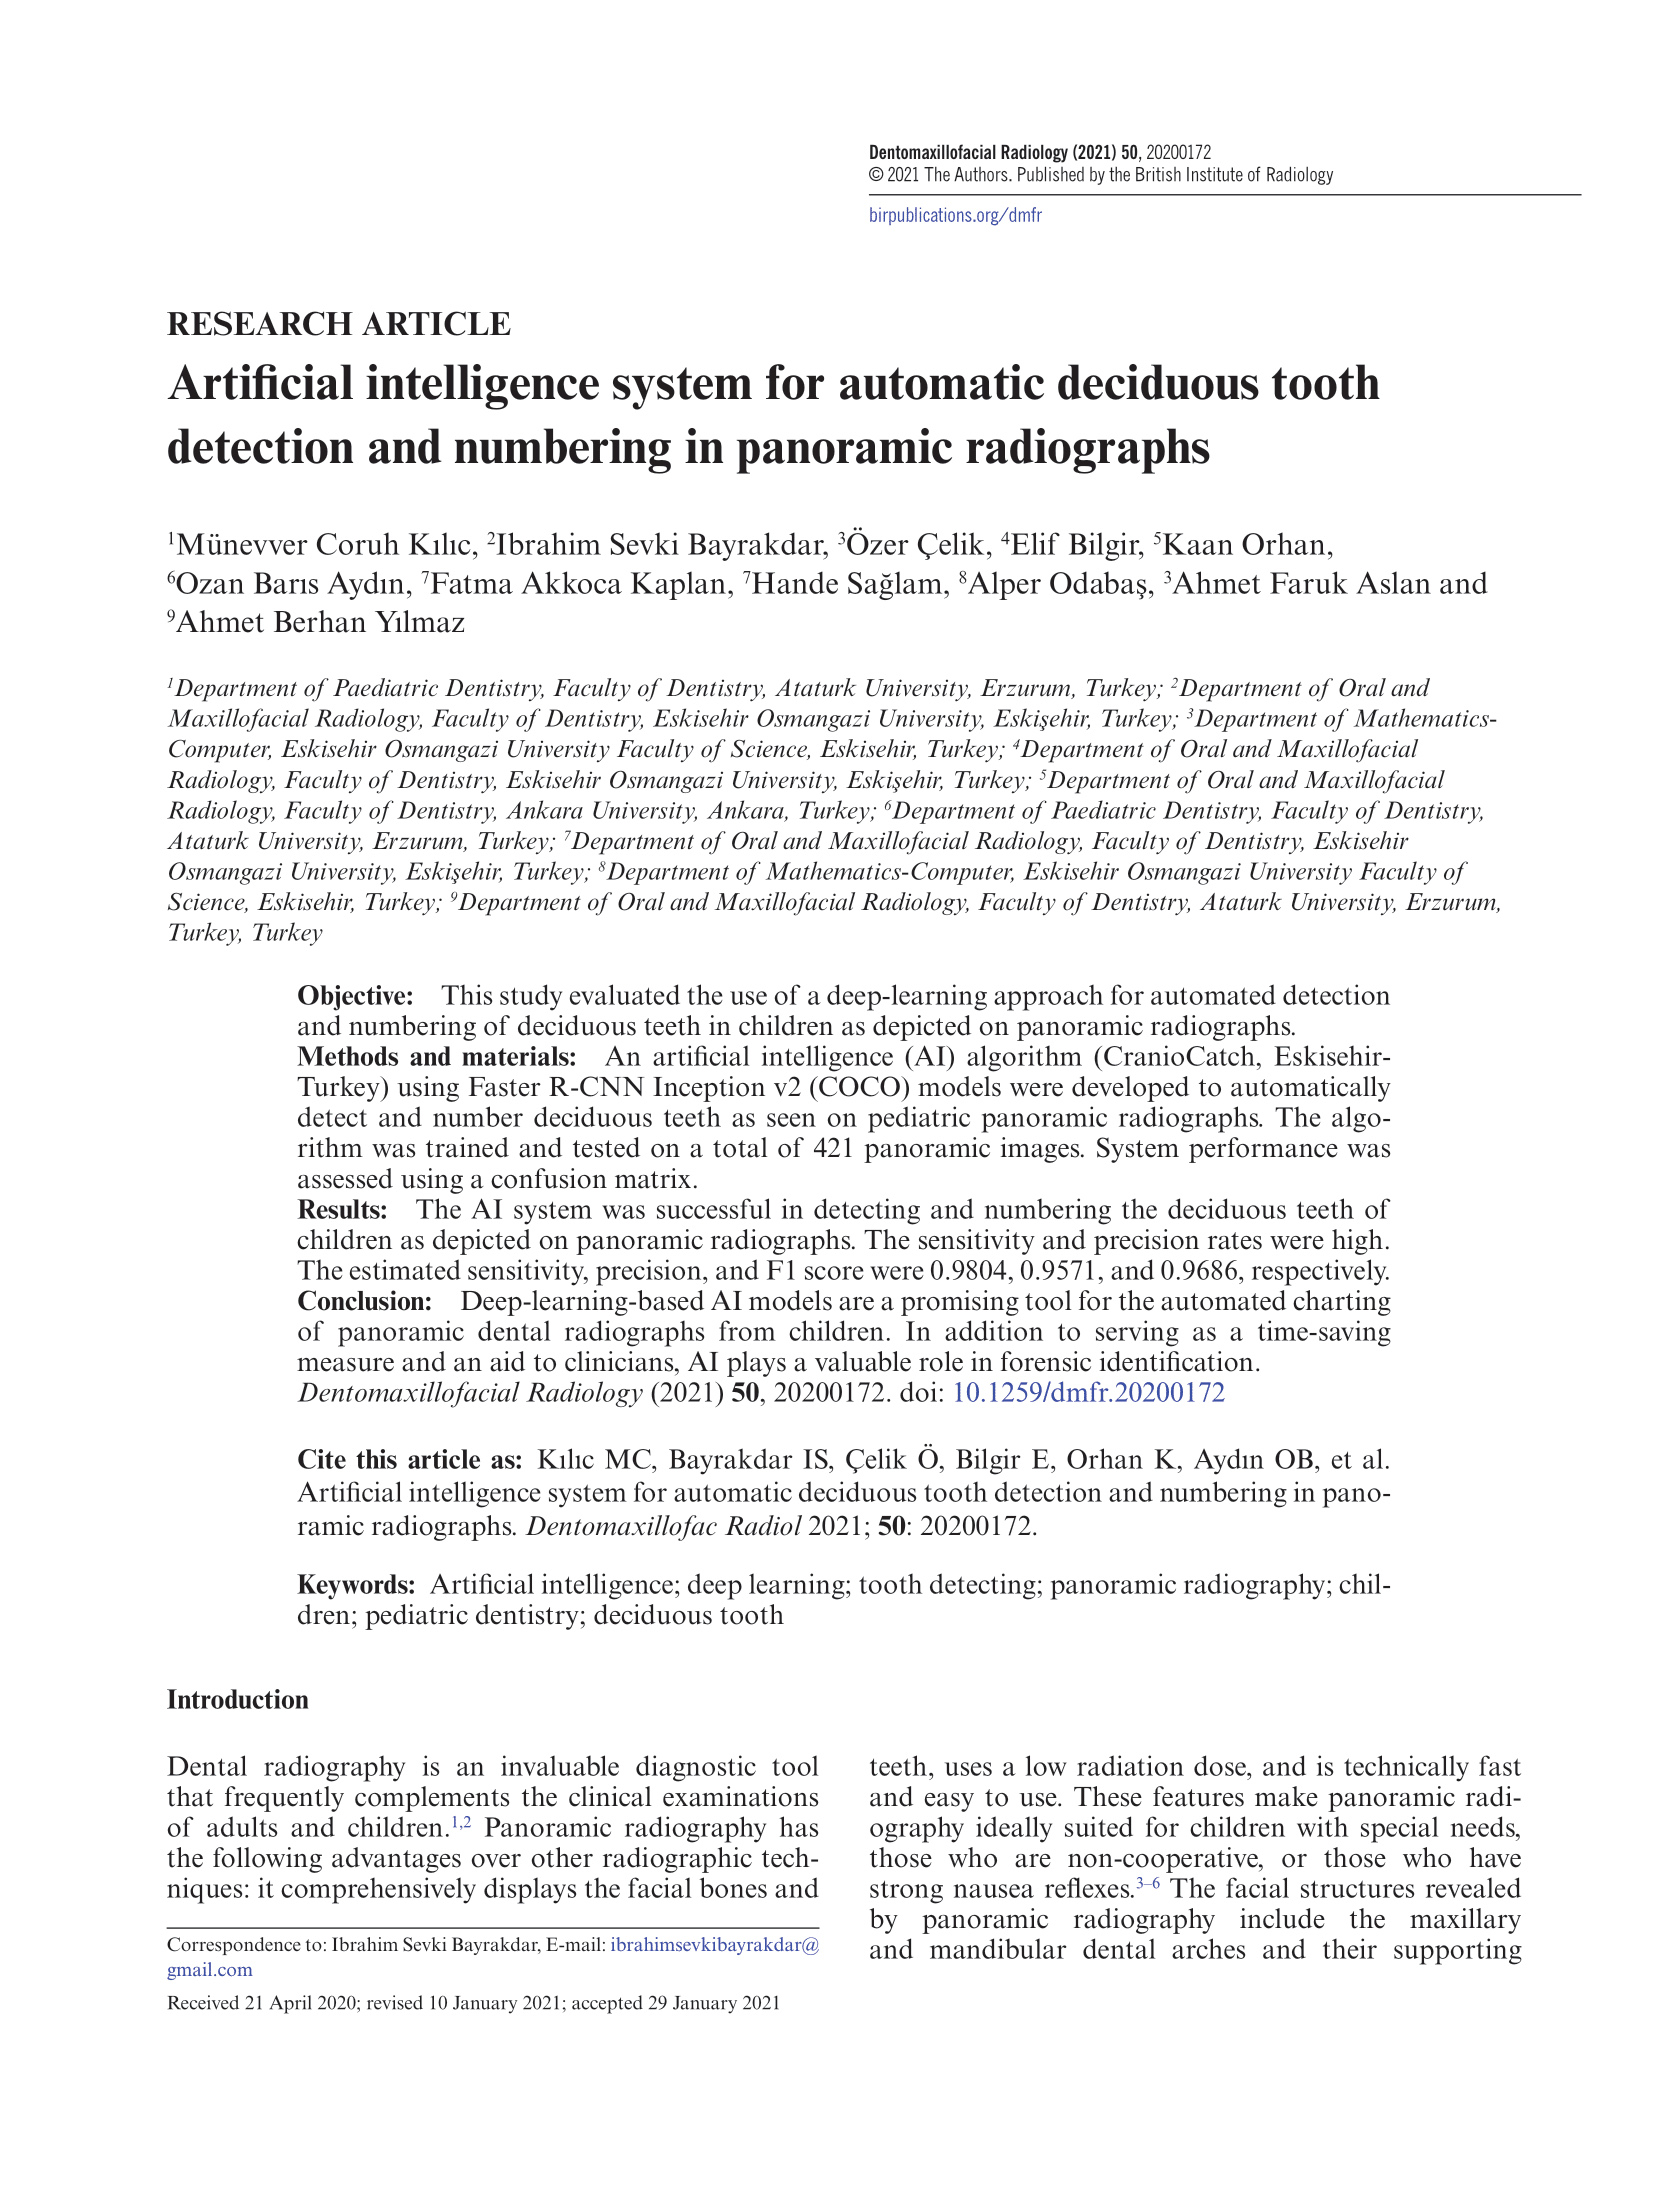 Artificial intelligence system for automatic deciduous tooth detection and numbering in panoramic radiographs